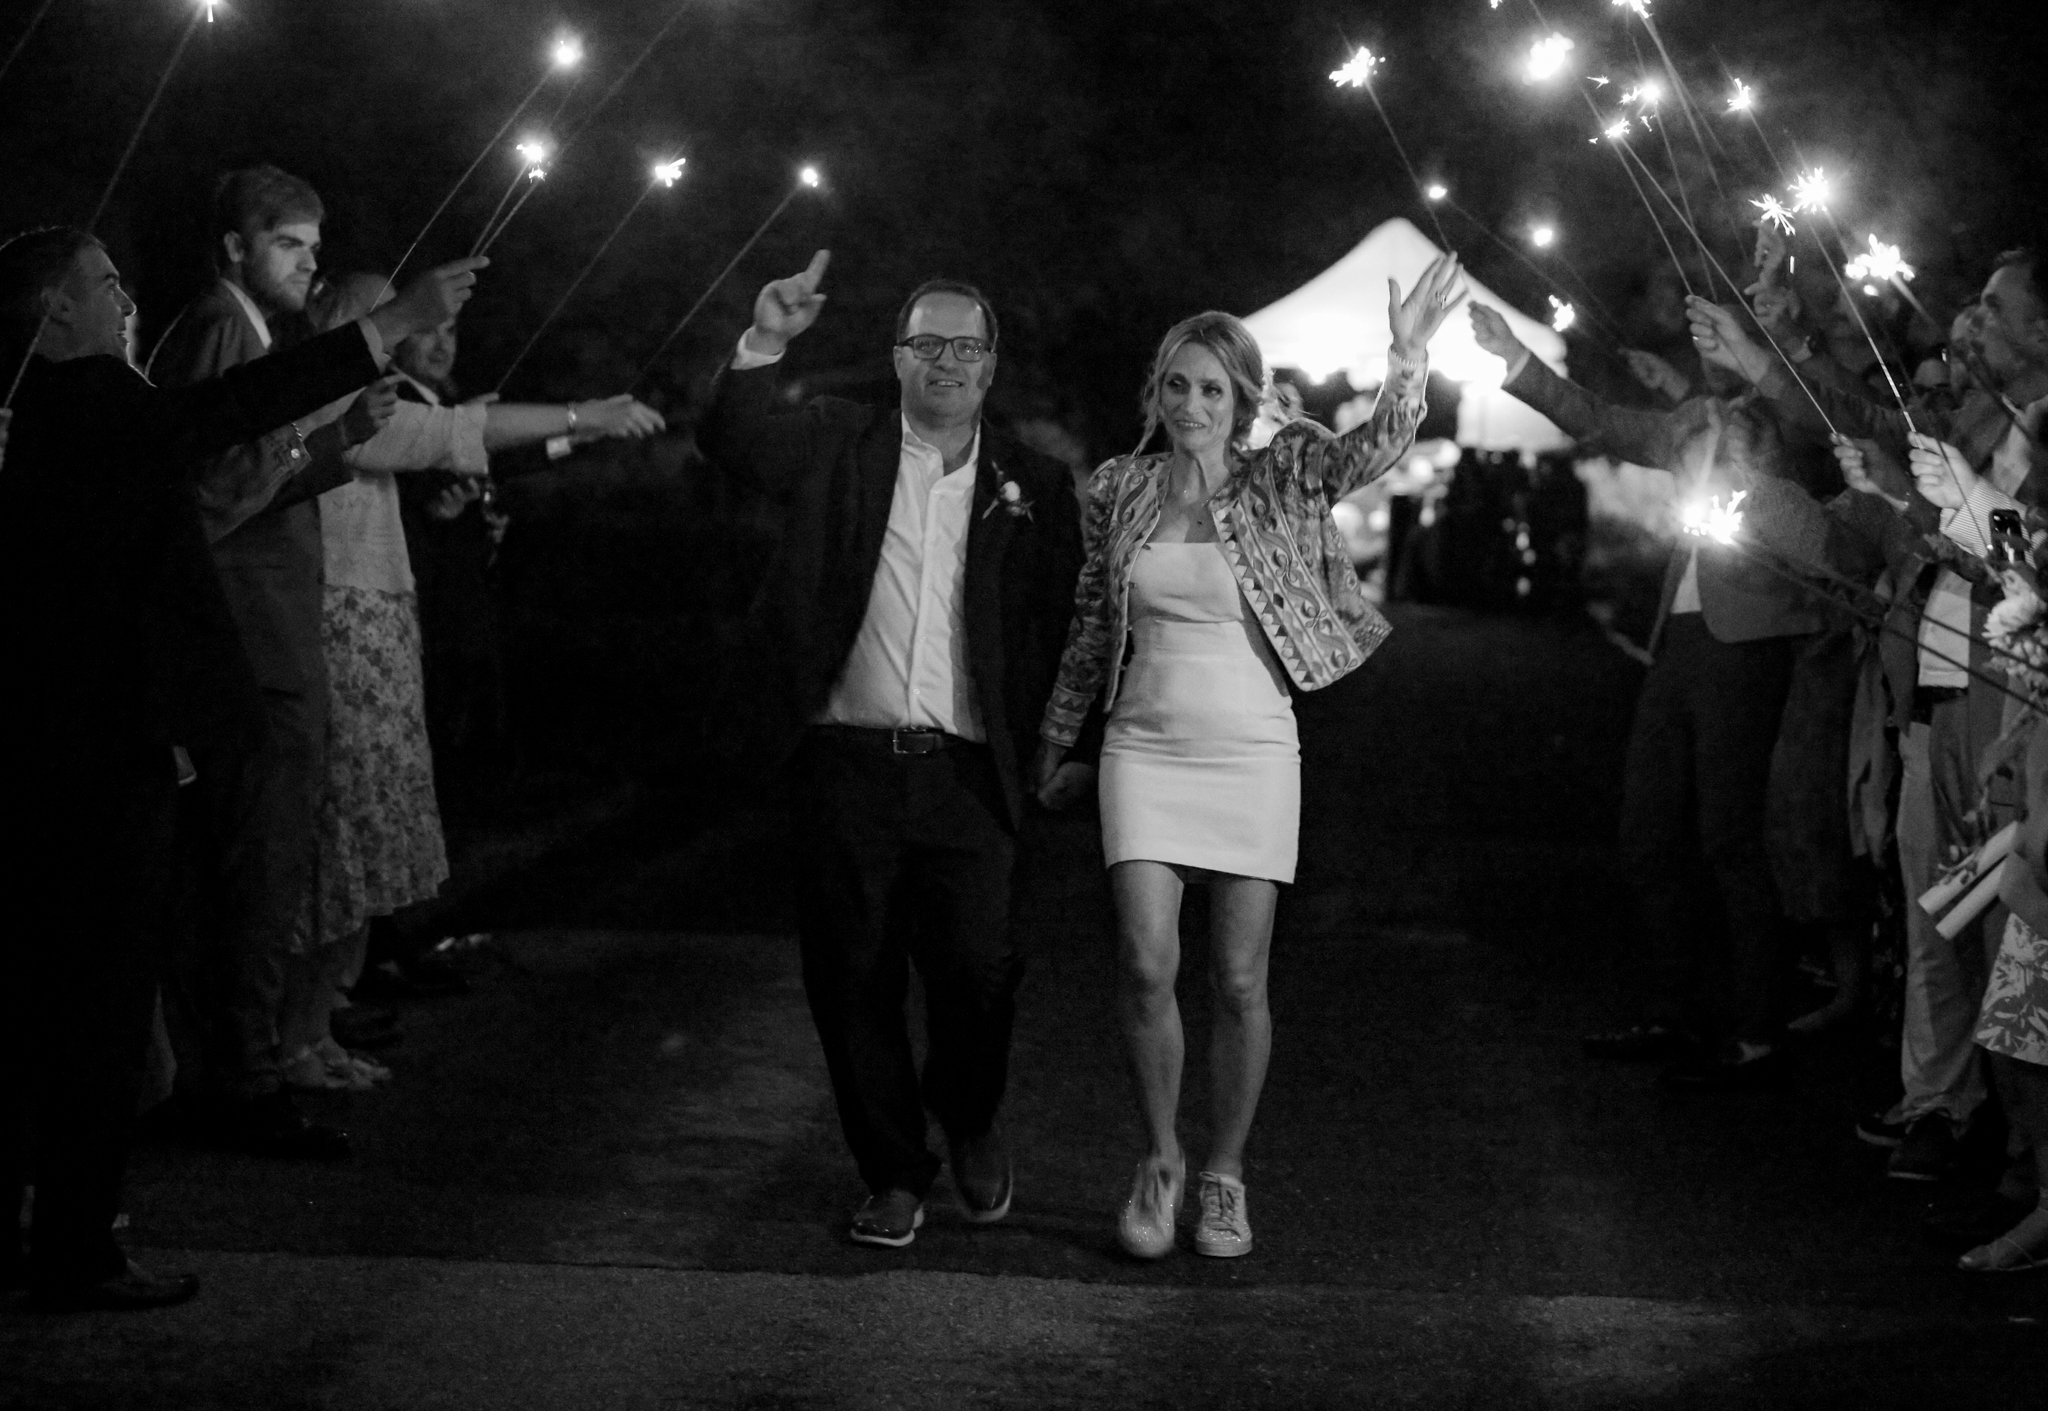 A bride and groom leave the Biltmore on a sparkler exit on their wedge day.  